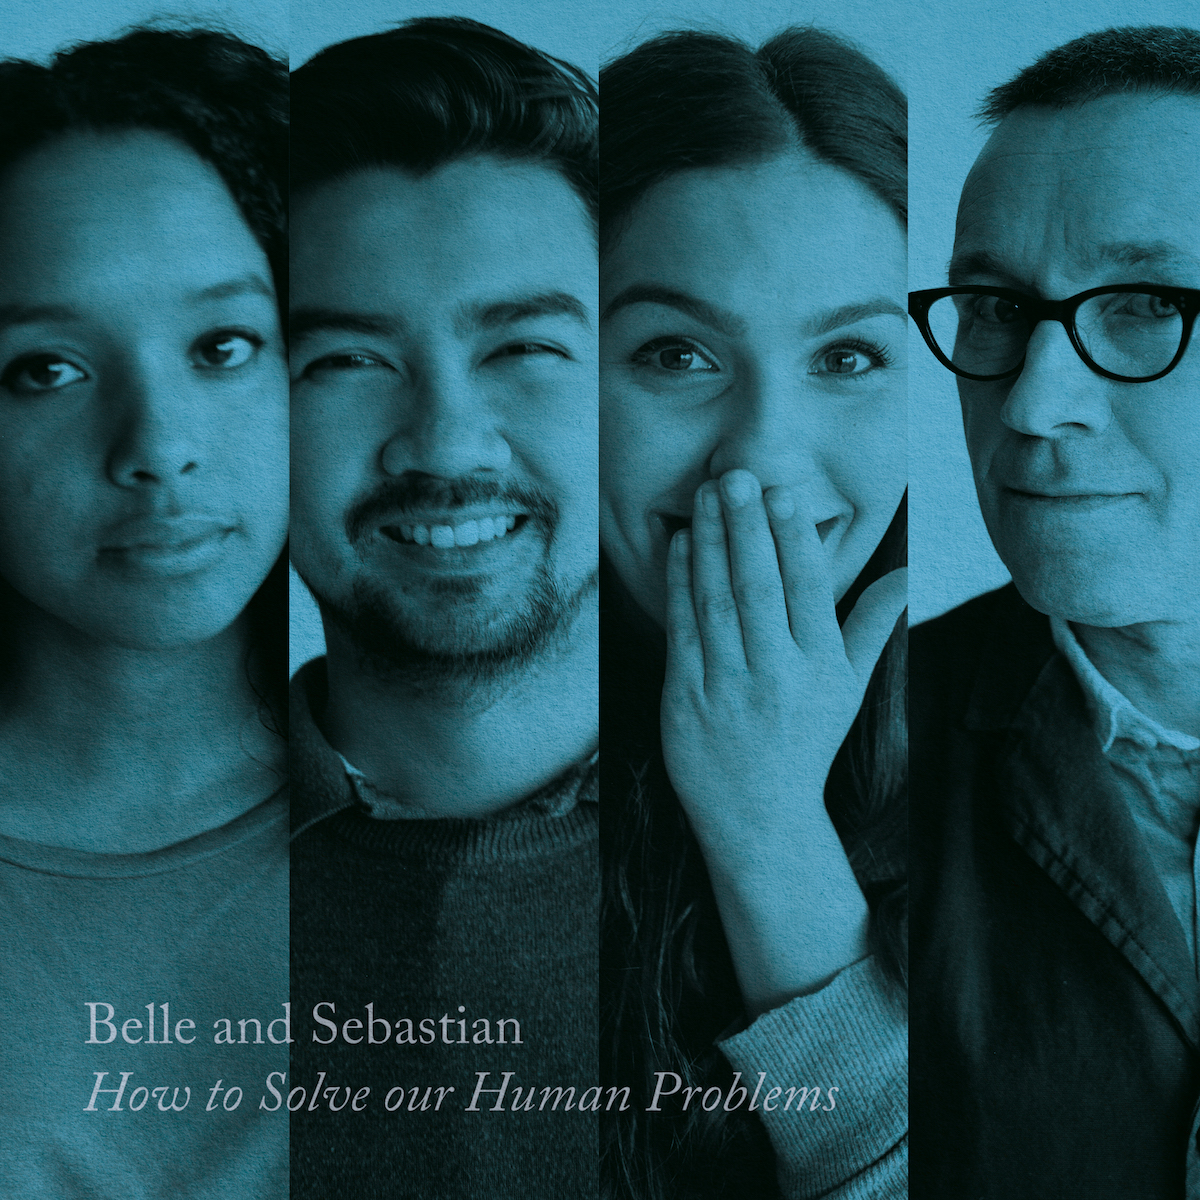 Belle and Sebastian Announce <i></noscript>How to Solve Our Human Problems</i> EP Trilogy, Release “I’ll Be Your Pilot”” title=”4000x4000px_EP3Cover-1507641821″ data-original-id=”261744″ data-adjusted-id=”261744″ class=”sm_size_full_width sm_alignment_center ” data-image-source=”getty” /></p>
</p></p>    <div class=